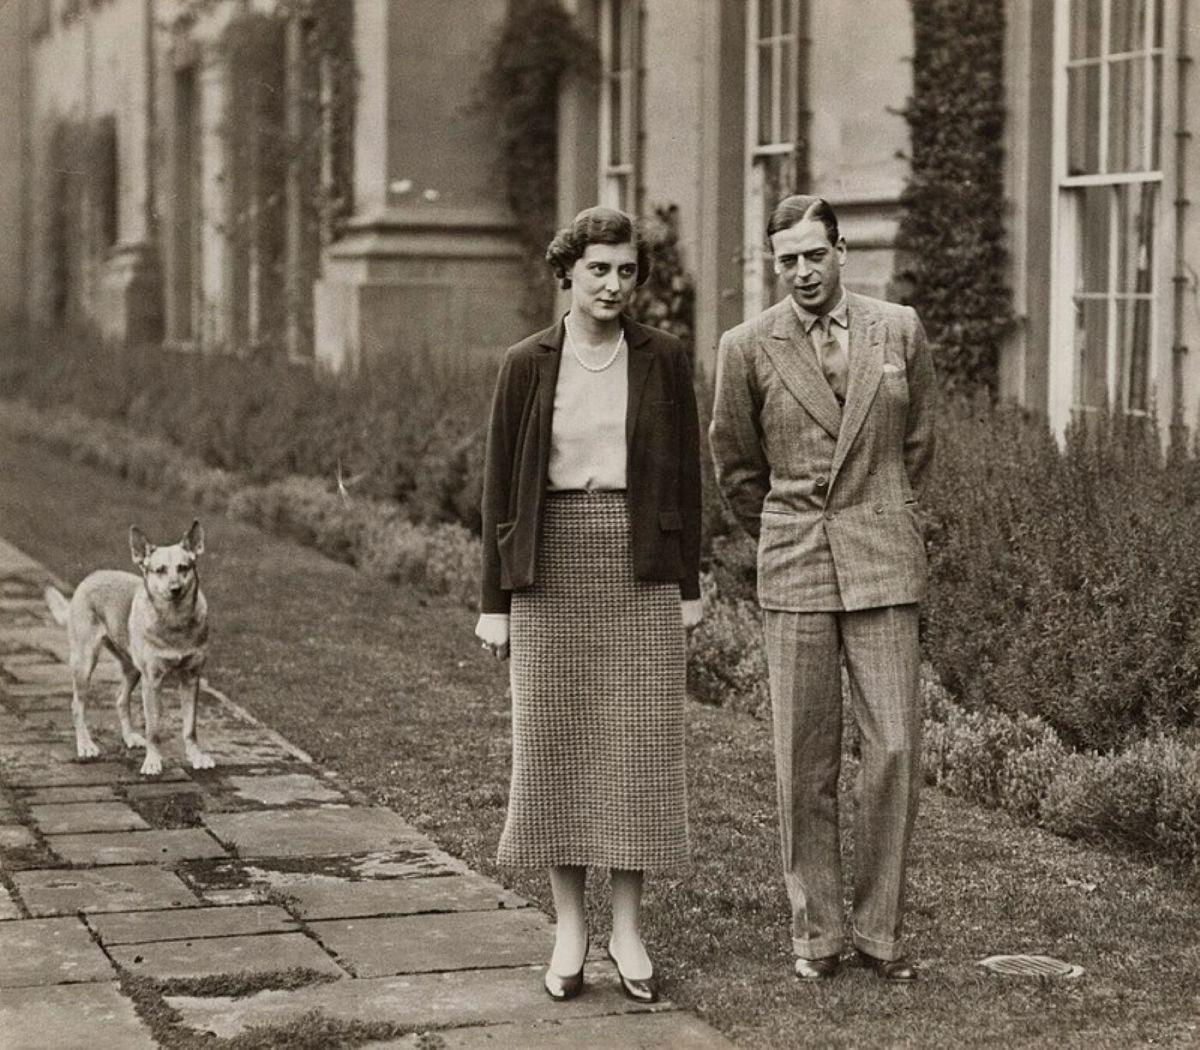 Alexandra's parents George and Marina, Duke and Duchess of Kent. George was the 4th son of King George V and Queen Mary.